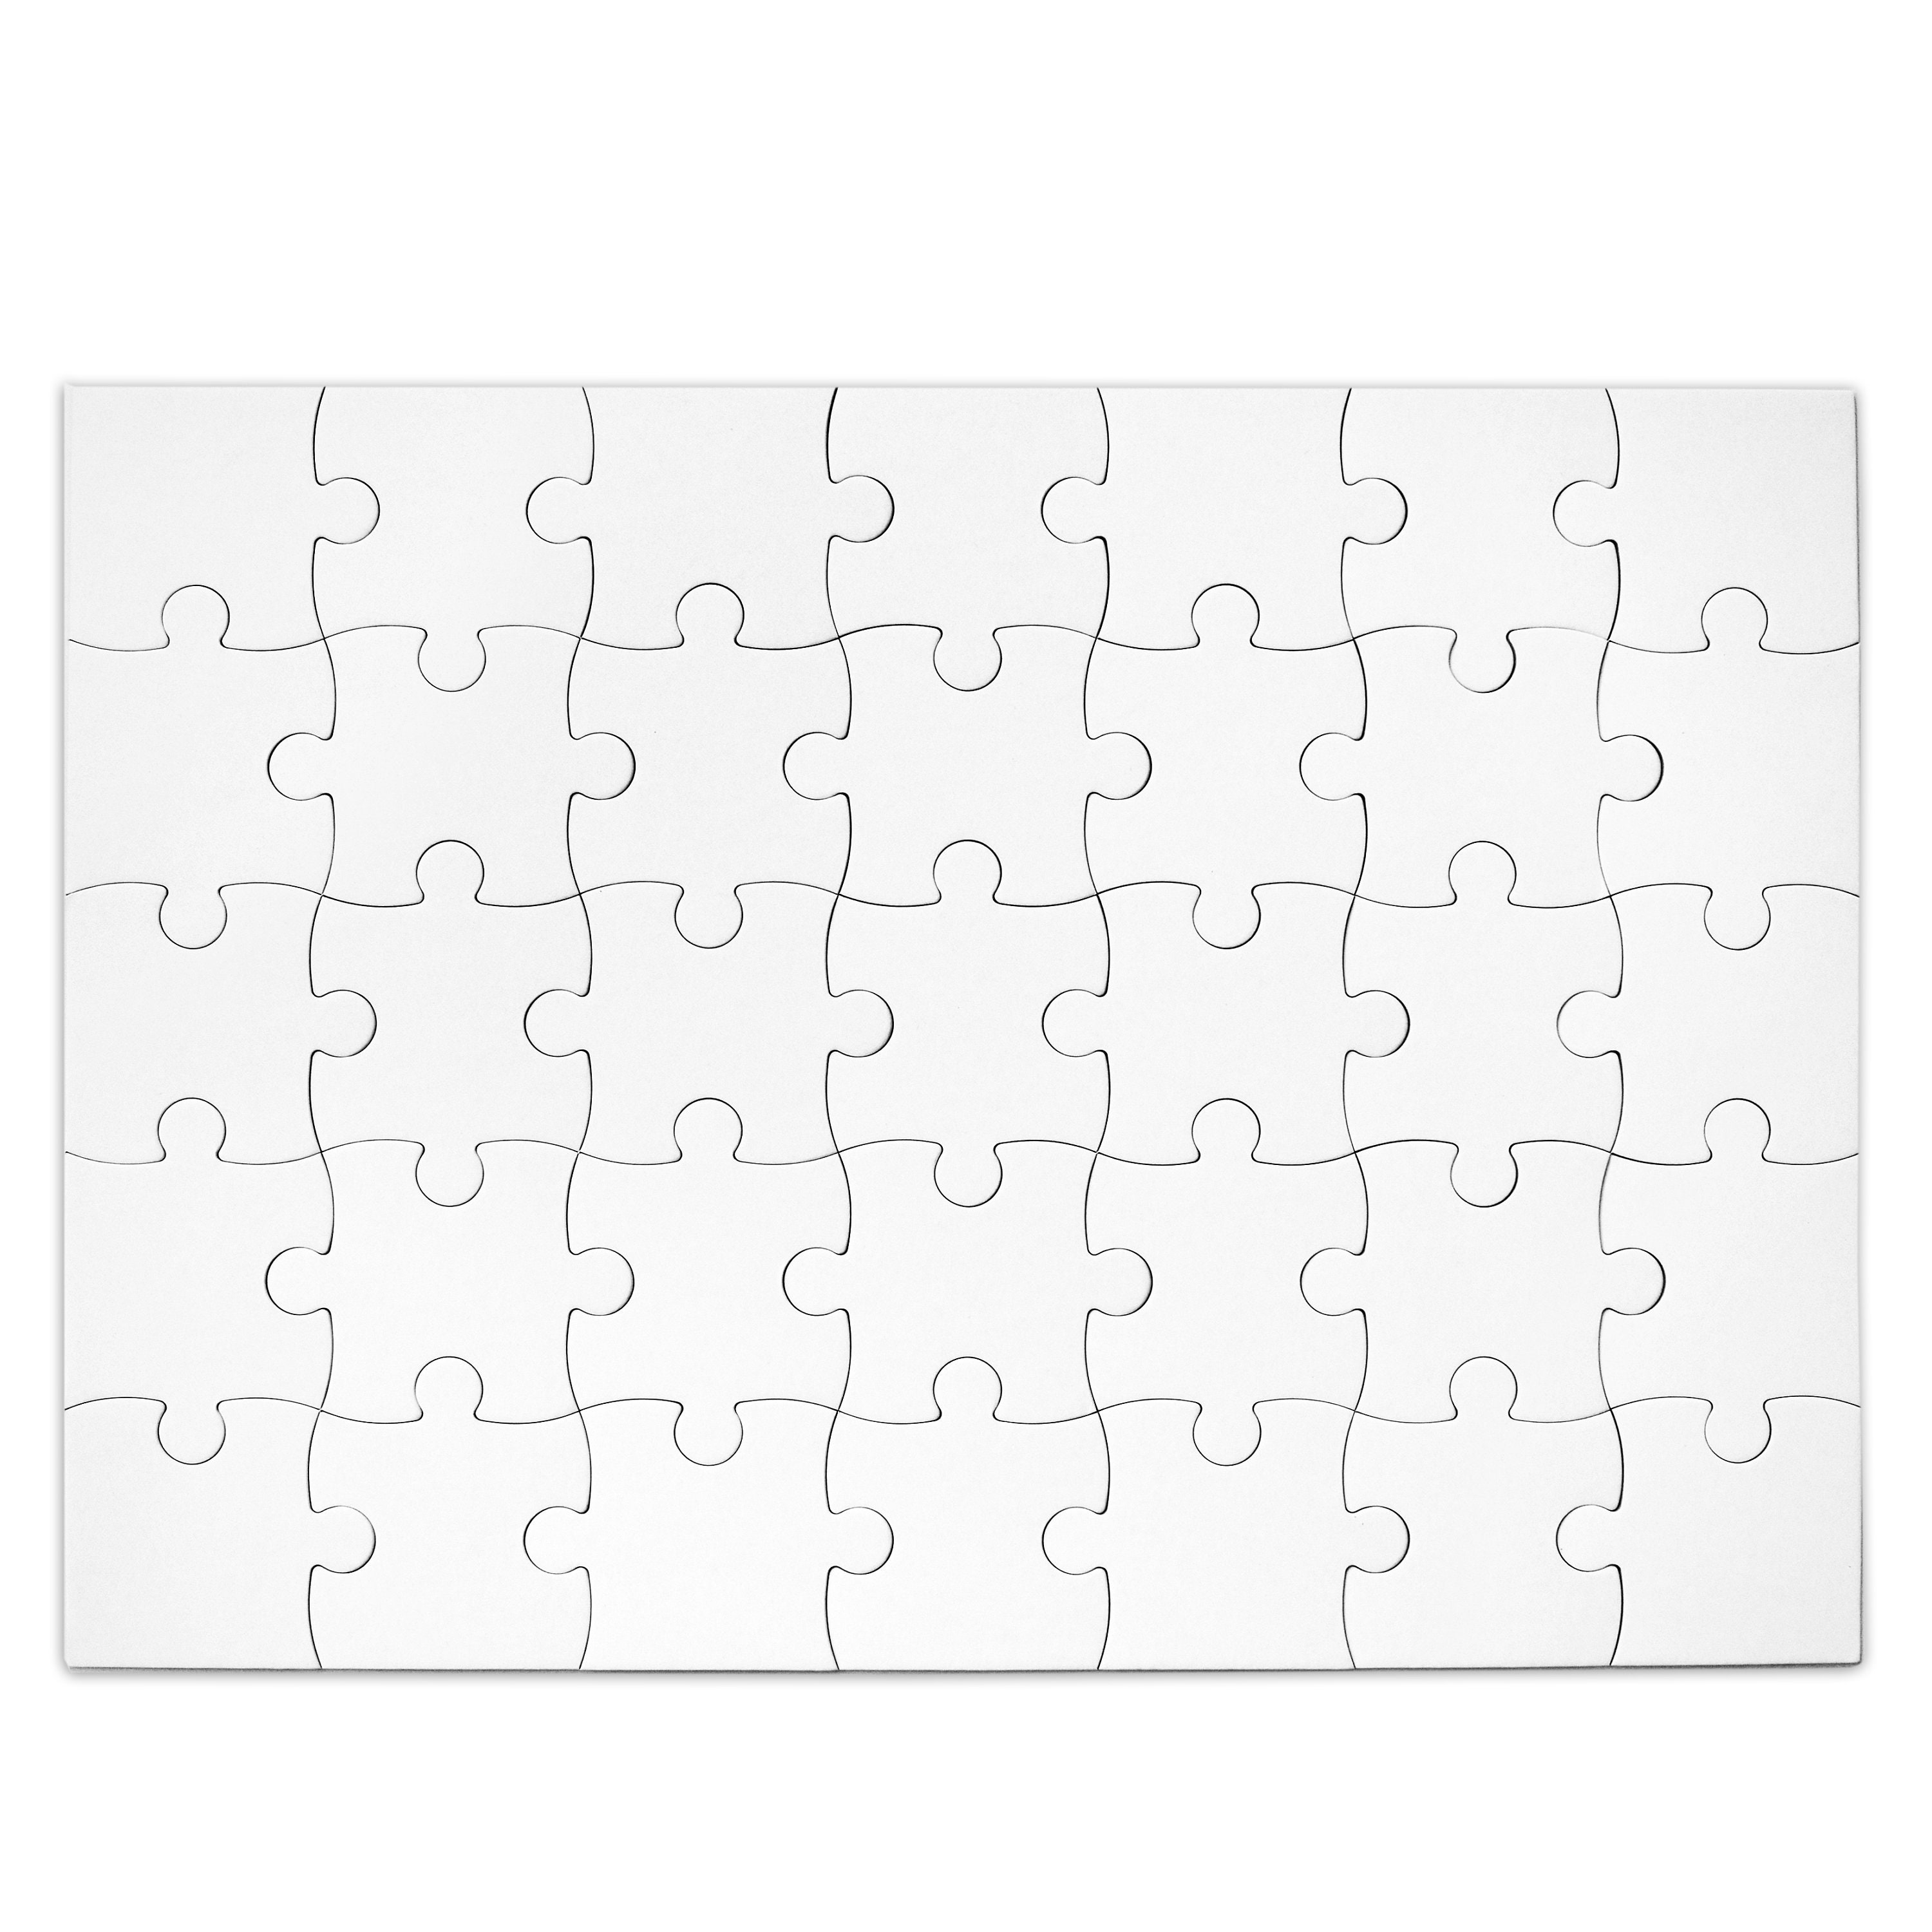 Inovart Puzzle-It 28-Piece Blank Puzzle, 24 Puzzles per Package, 5-1/2 inch x 8 inch, White